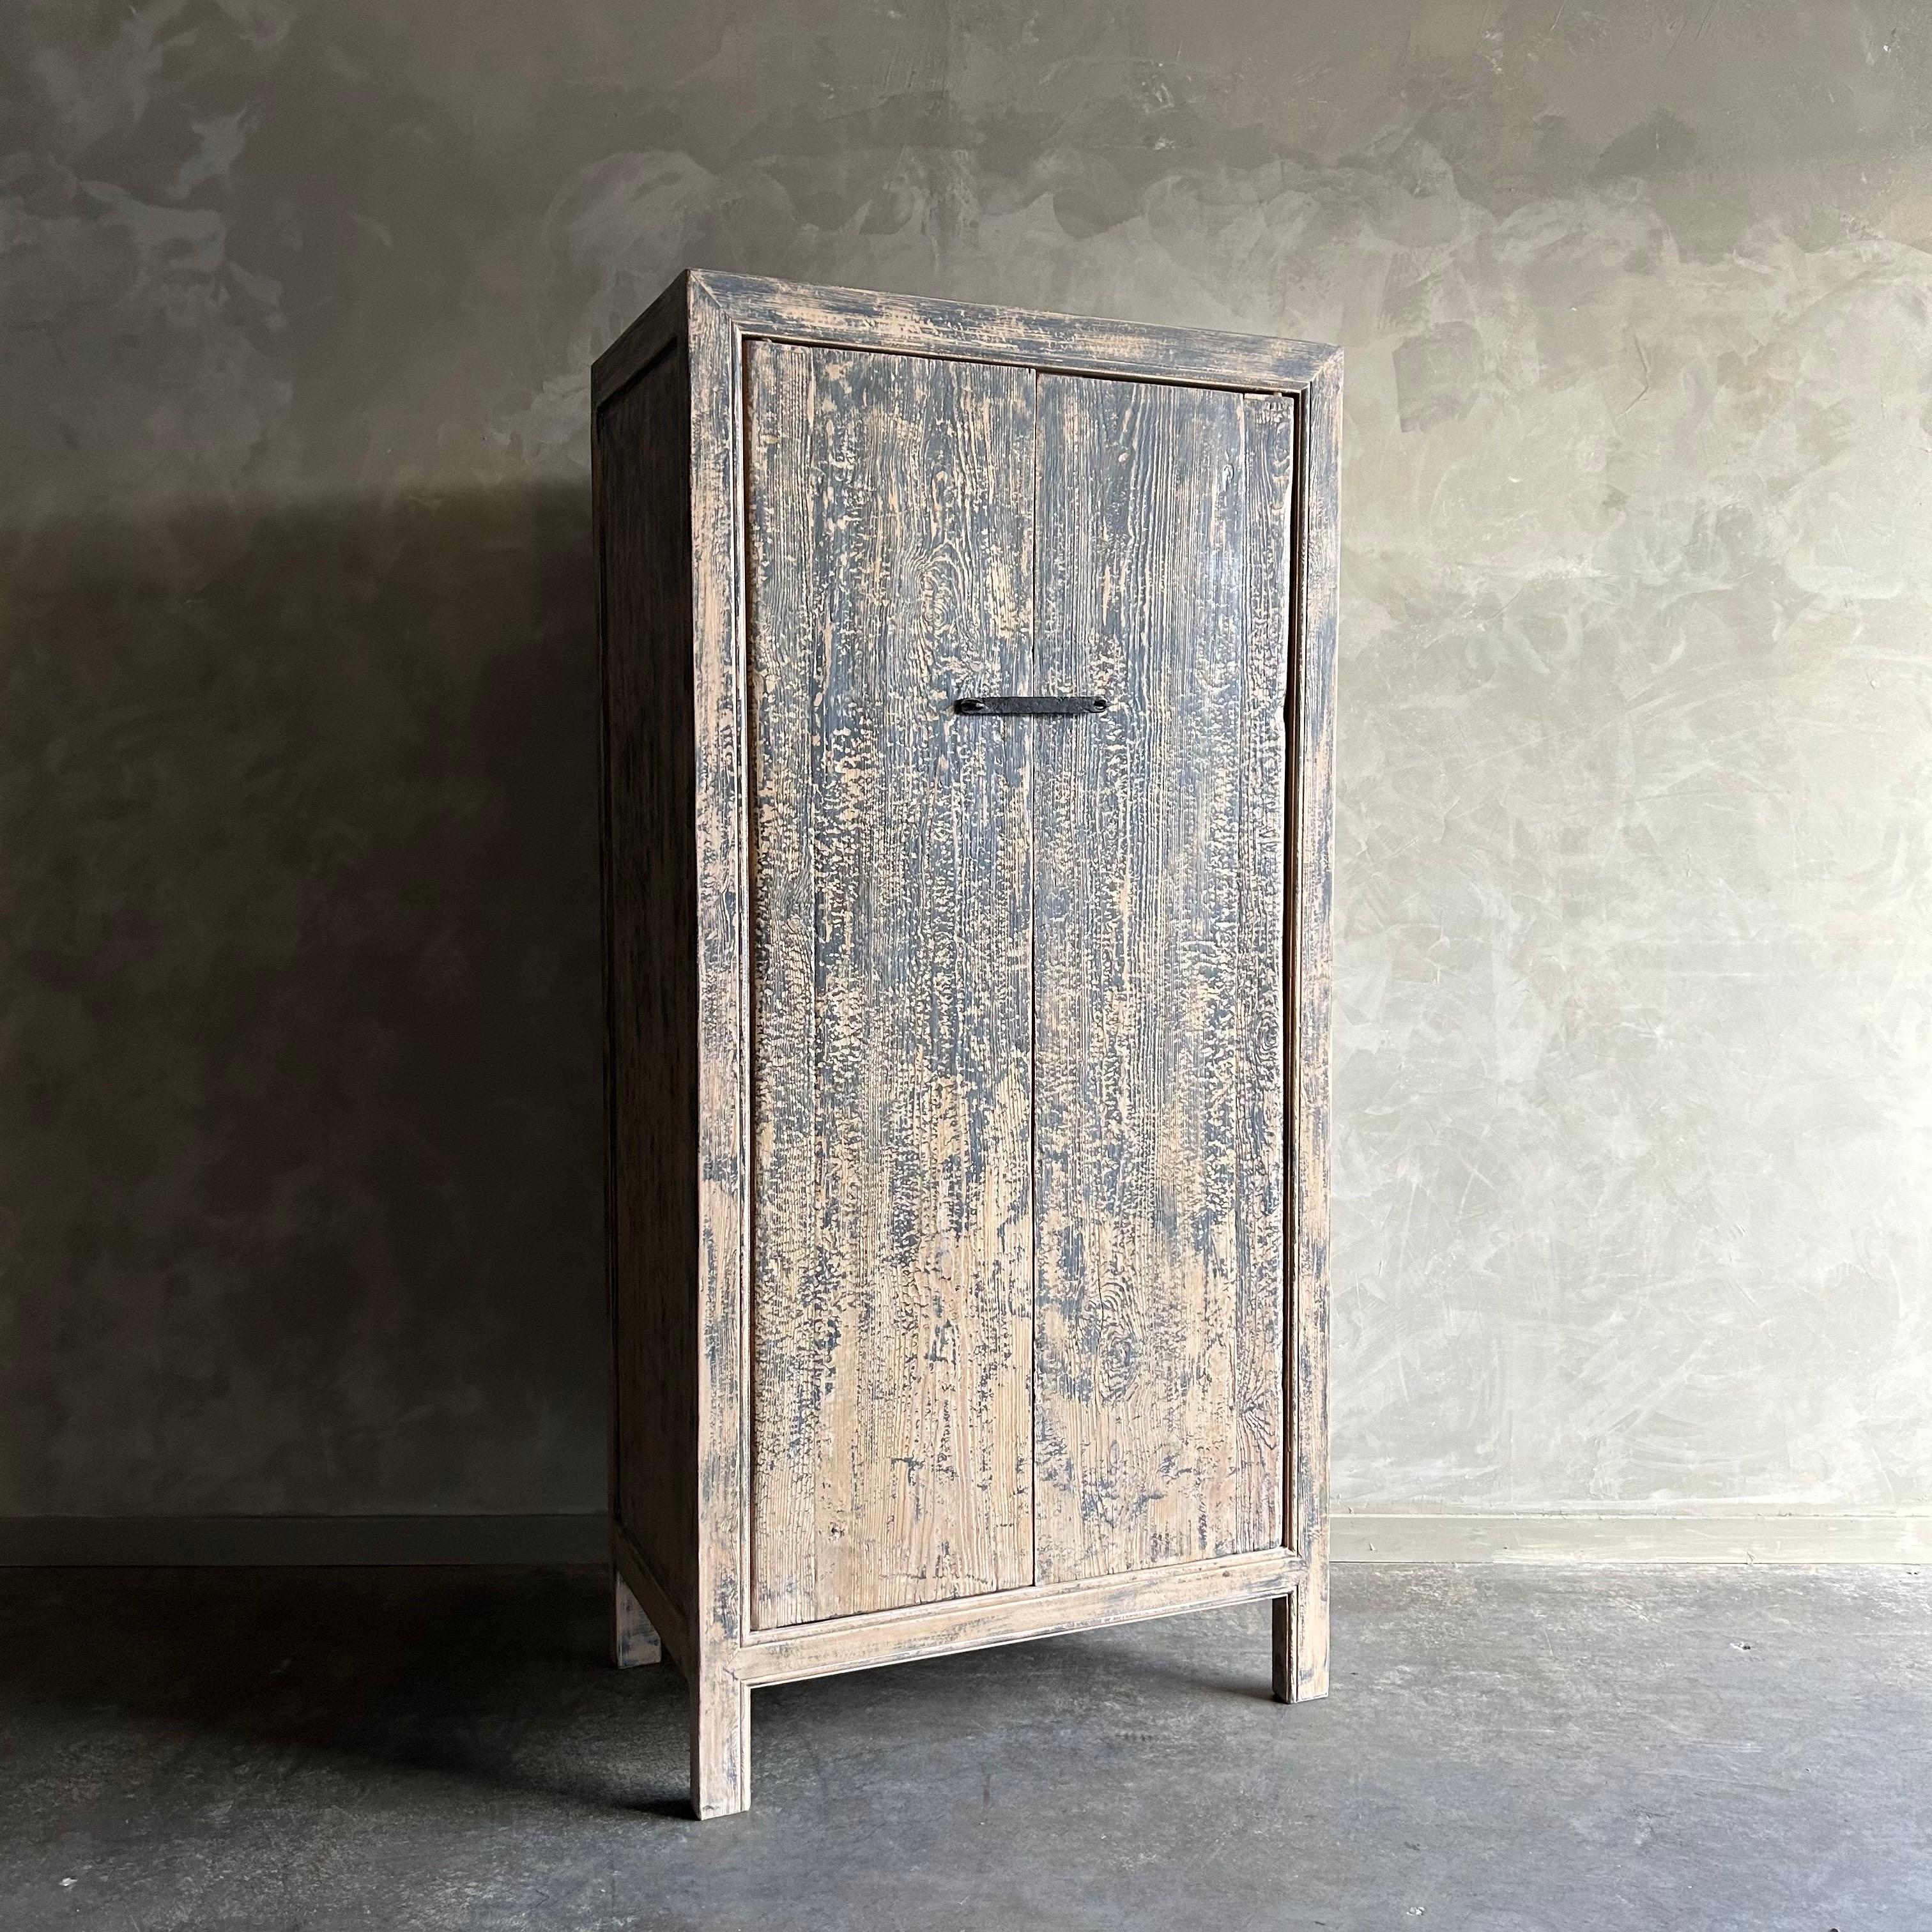 
Reclaimed Wood Cabinet Armoire. Beautiful antique patina, these are solid and sturdy ready for daily use, use for a wardrobe, hideaway clutter, or store china or linens. Great in a living room with baskets or ottomans stored inside to keep you